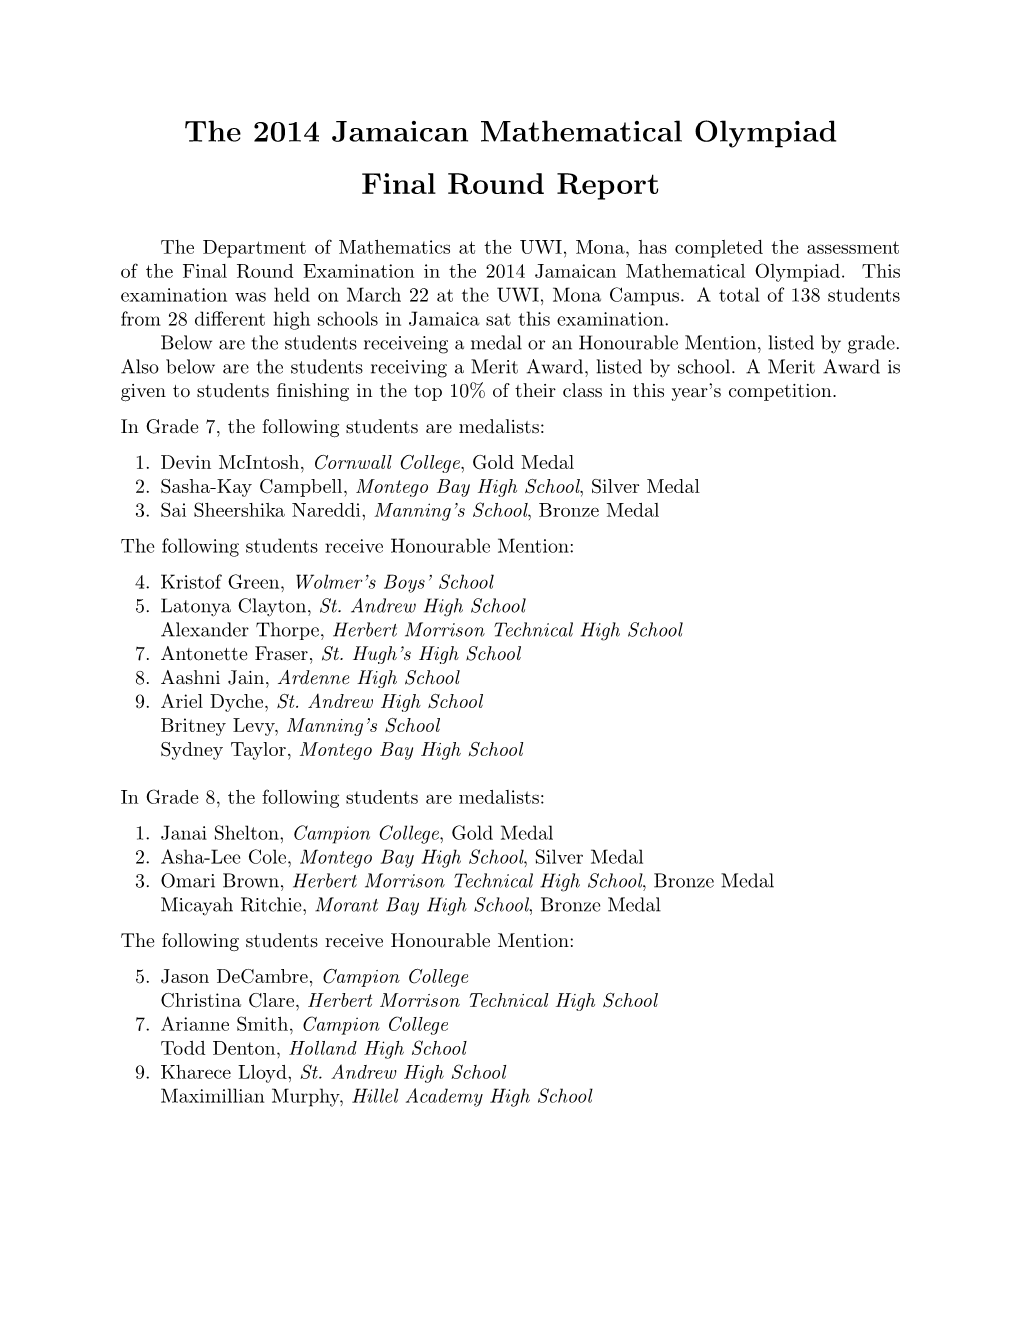 The 2014 Jamaican Mathematical Olympiad Final Round Report